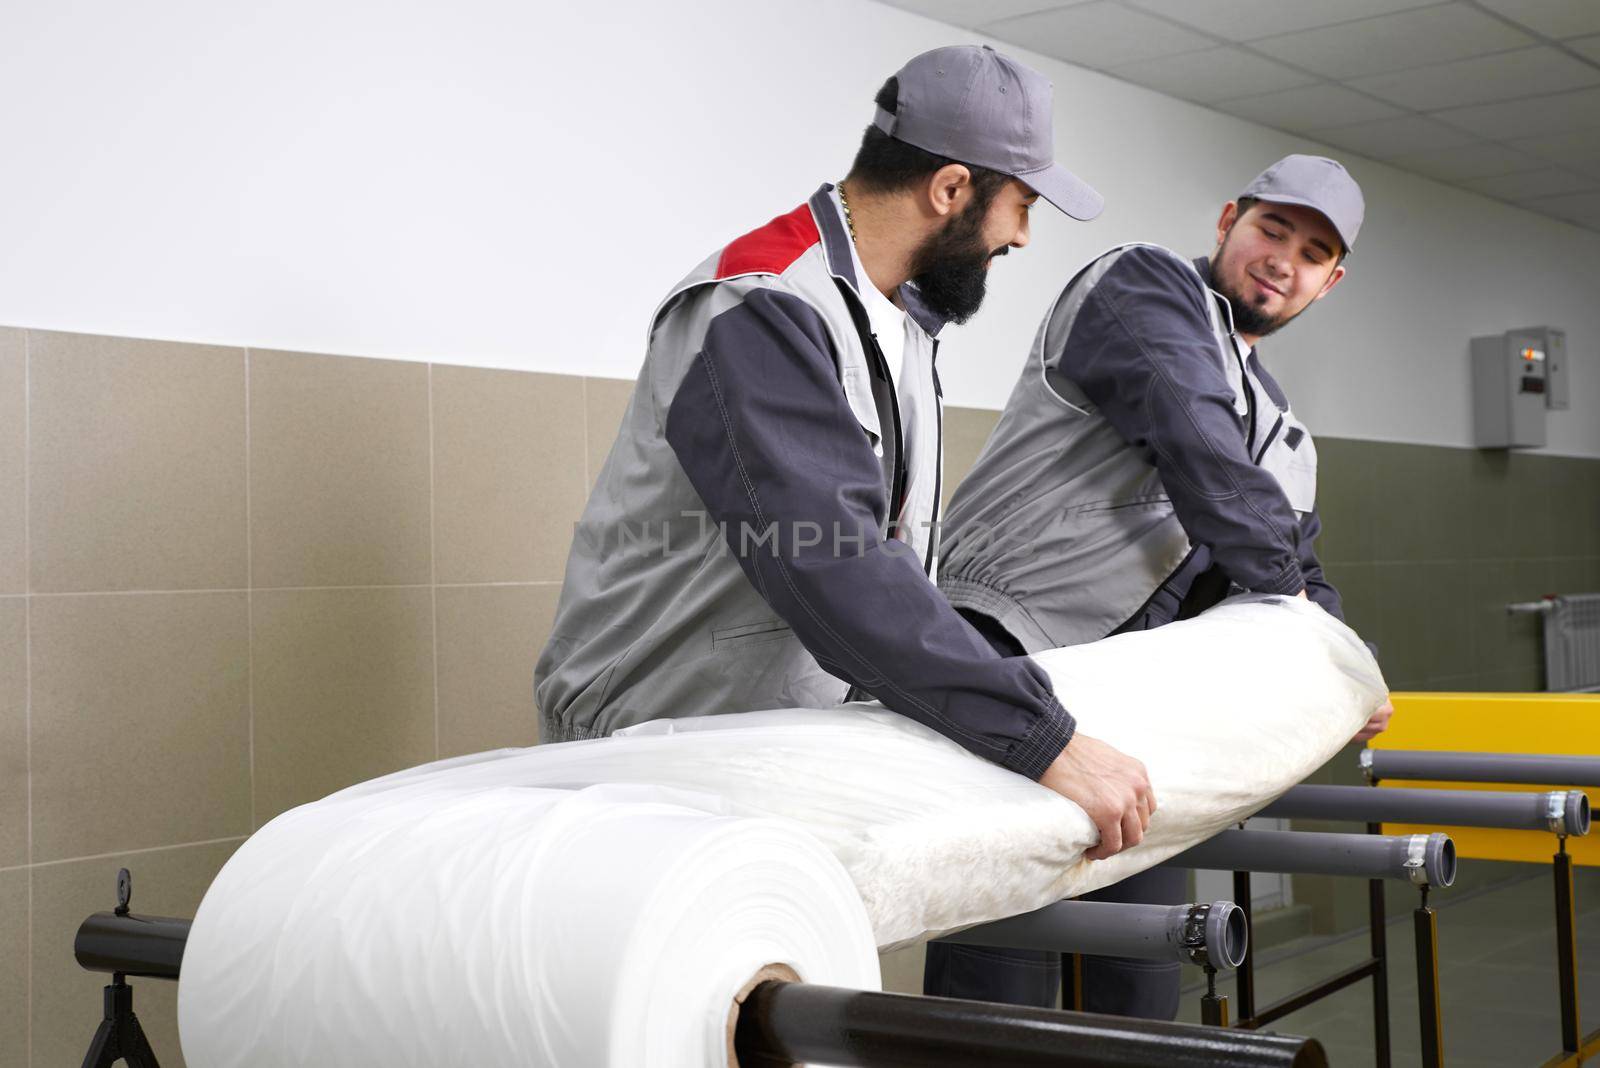 Men workers packing carpet in a plastic bag after cleaning it in automatic washing machine and dryer